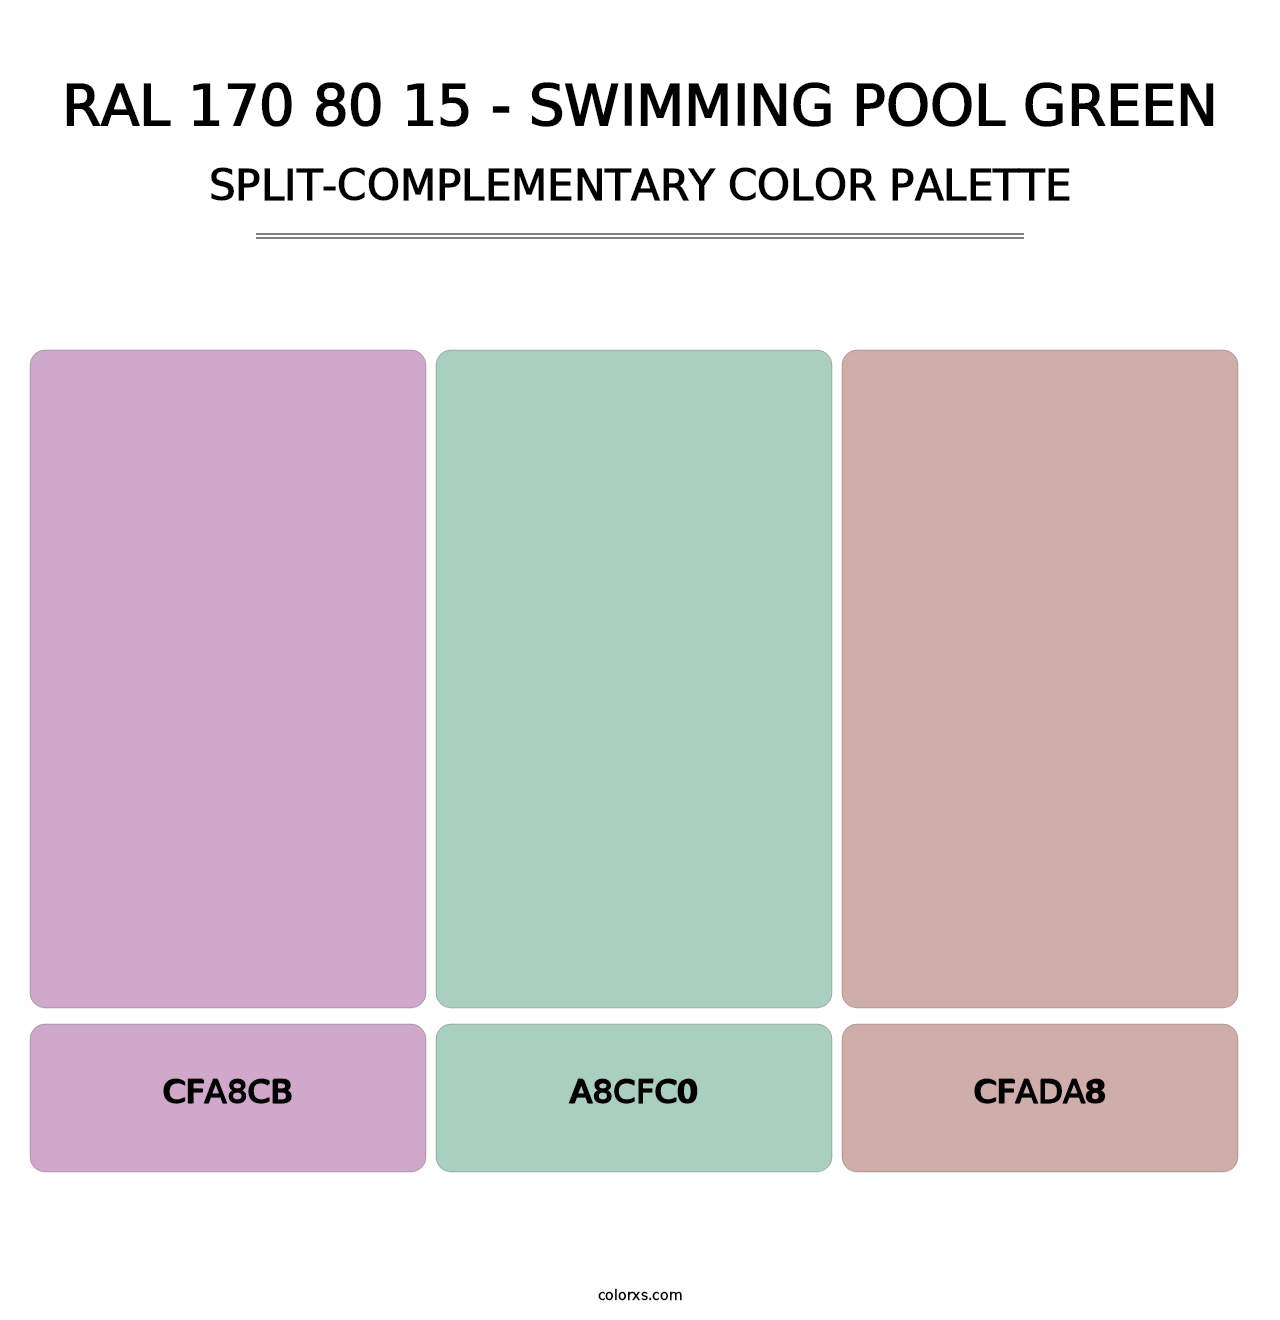 RAL 170 80 15 - Swimming Pool Green - Split-Complementary Color Palette